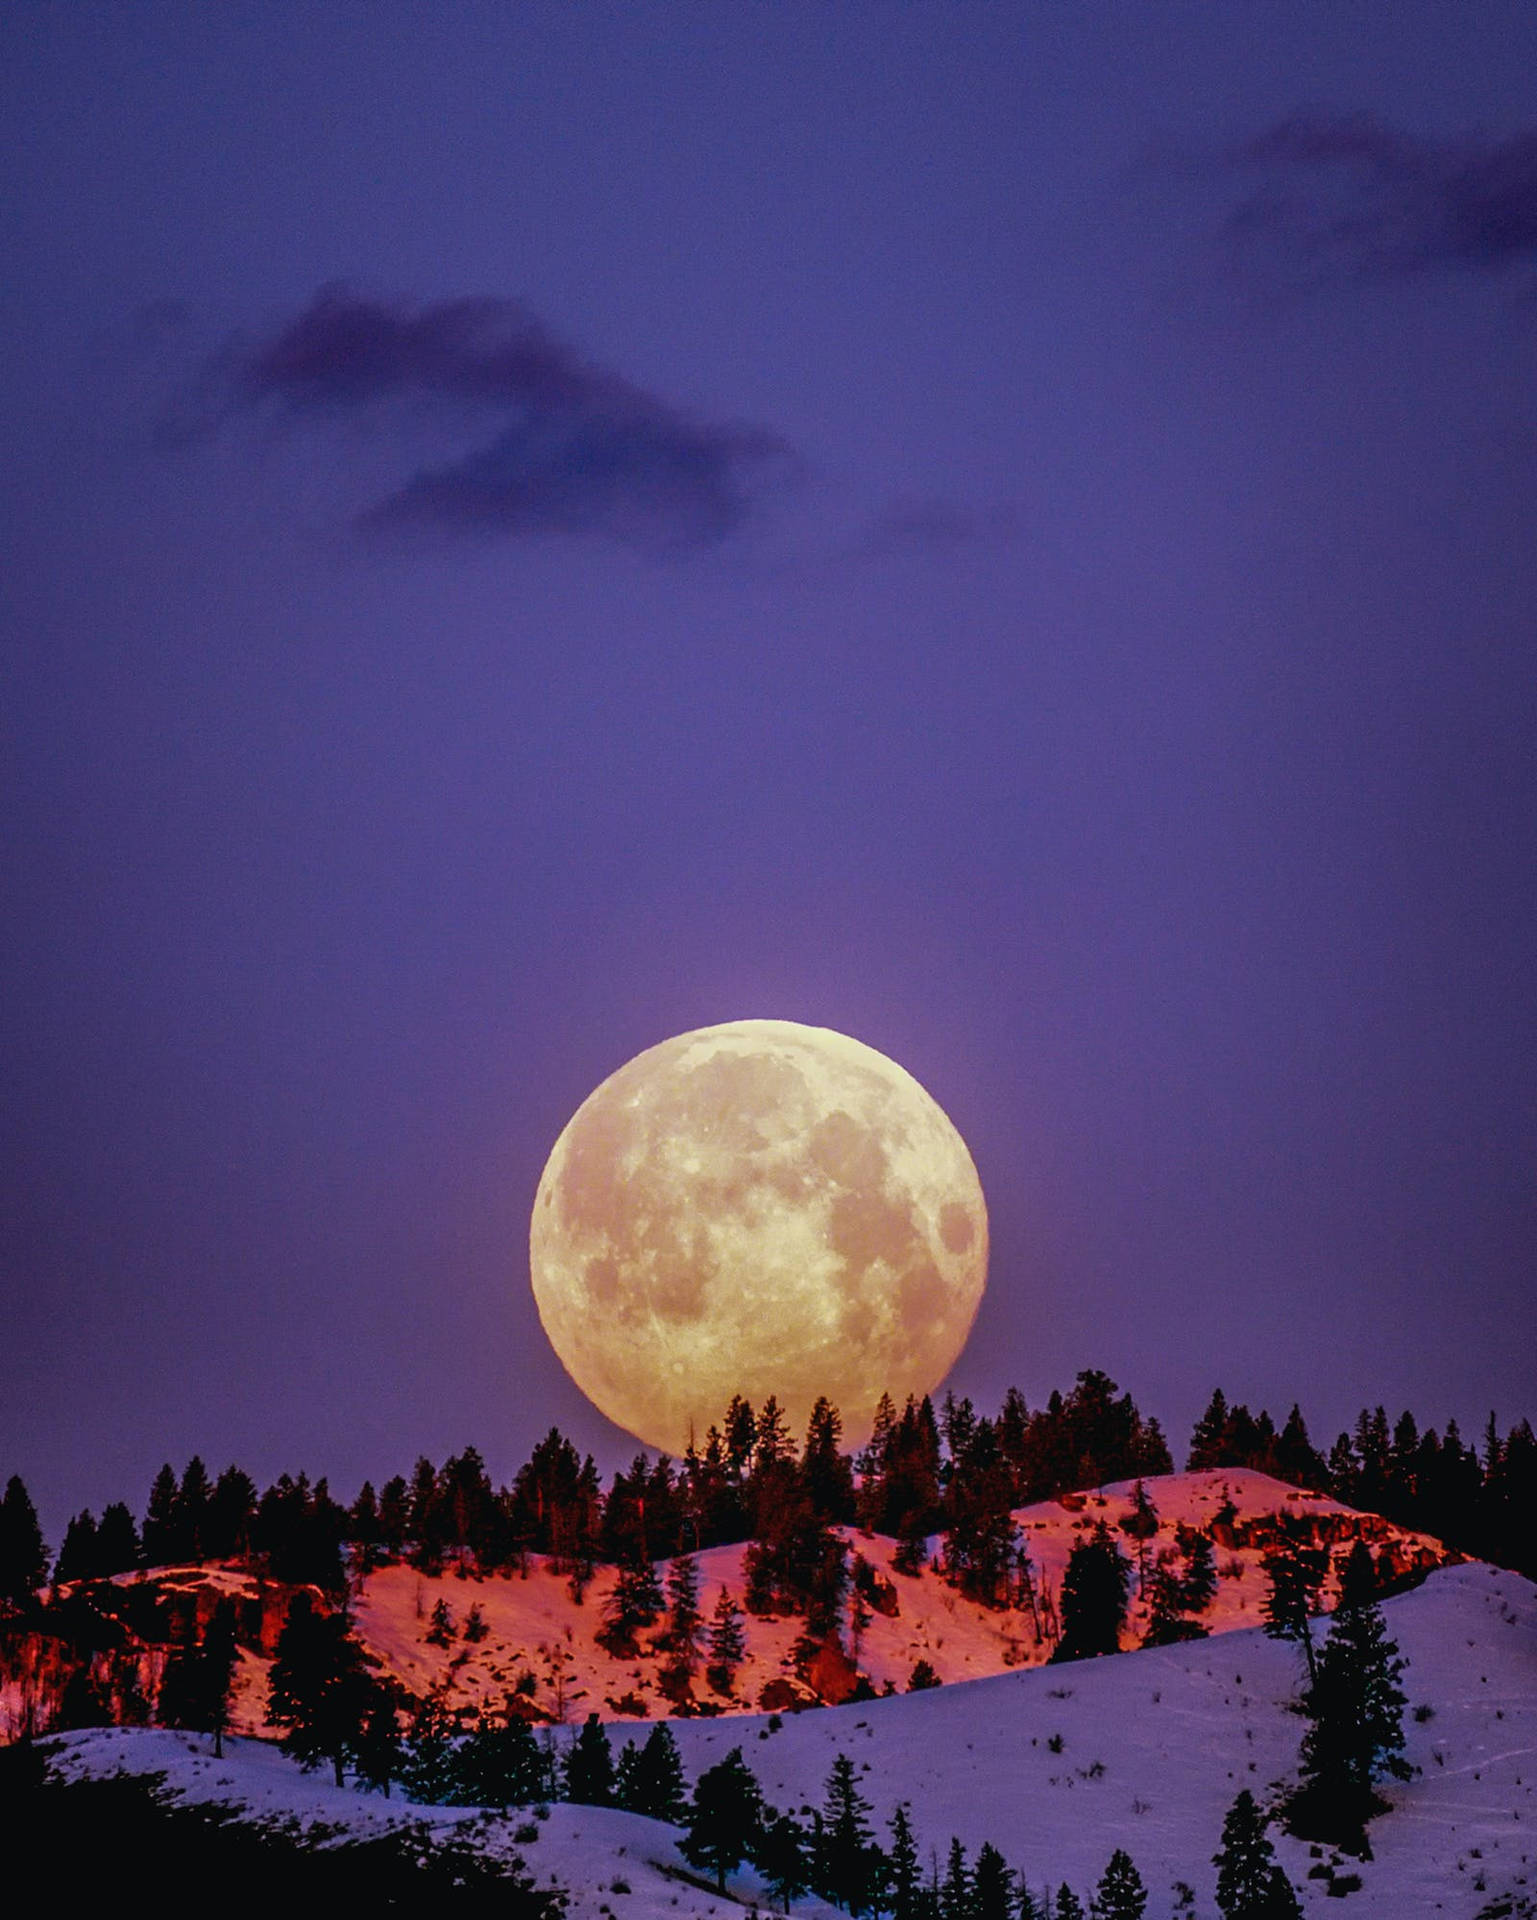 Super Moon Casting Moonlight Over Mountain Background